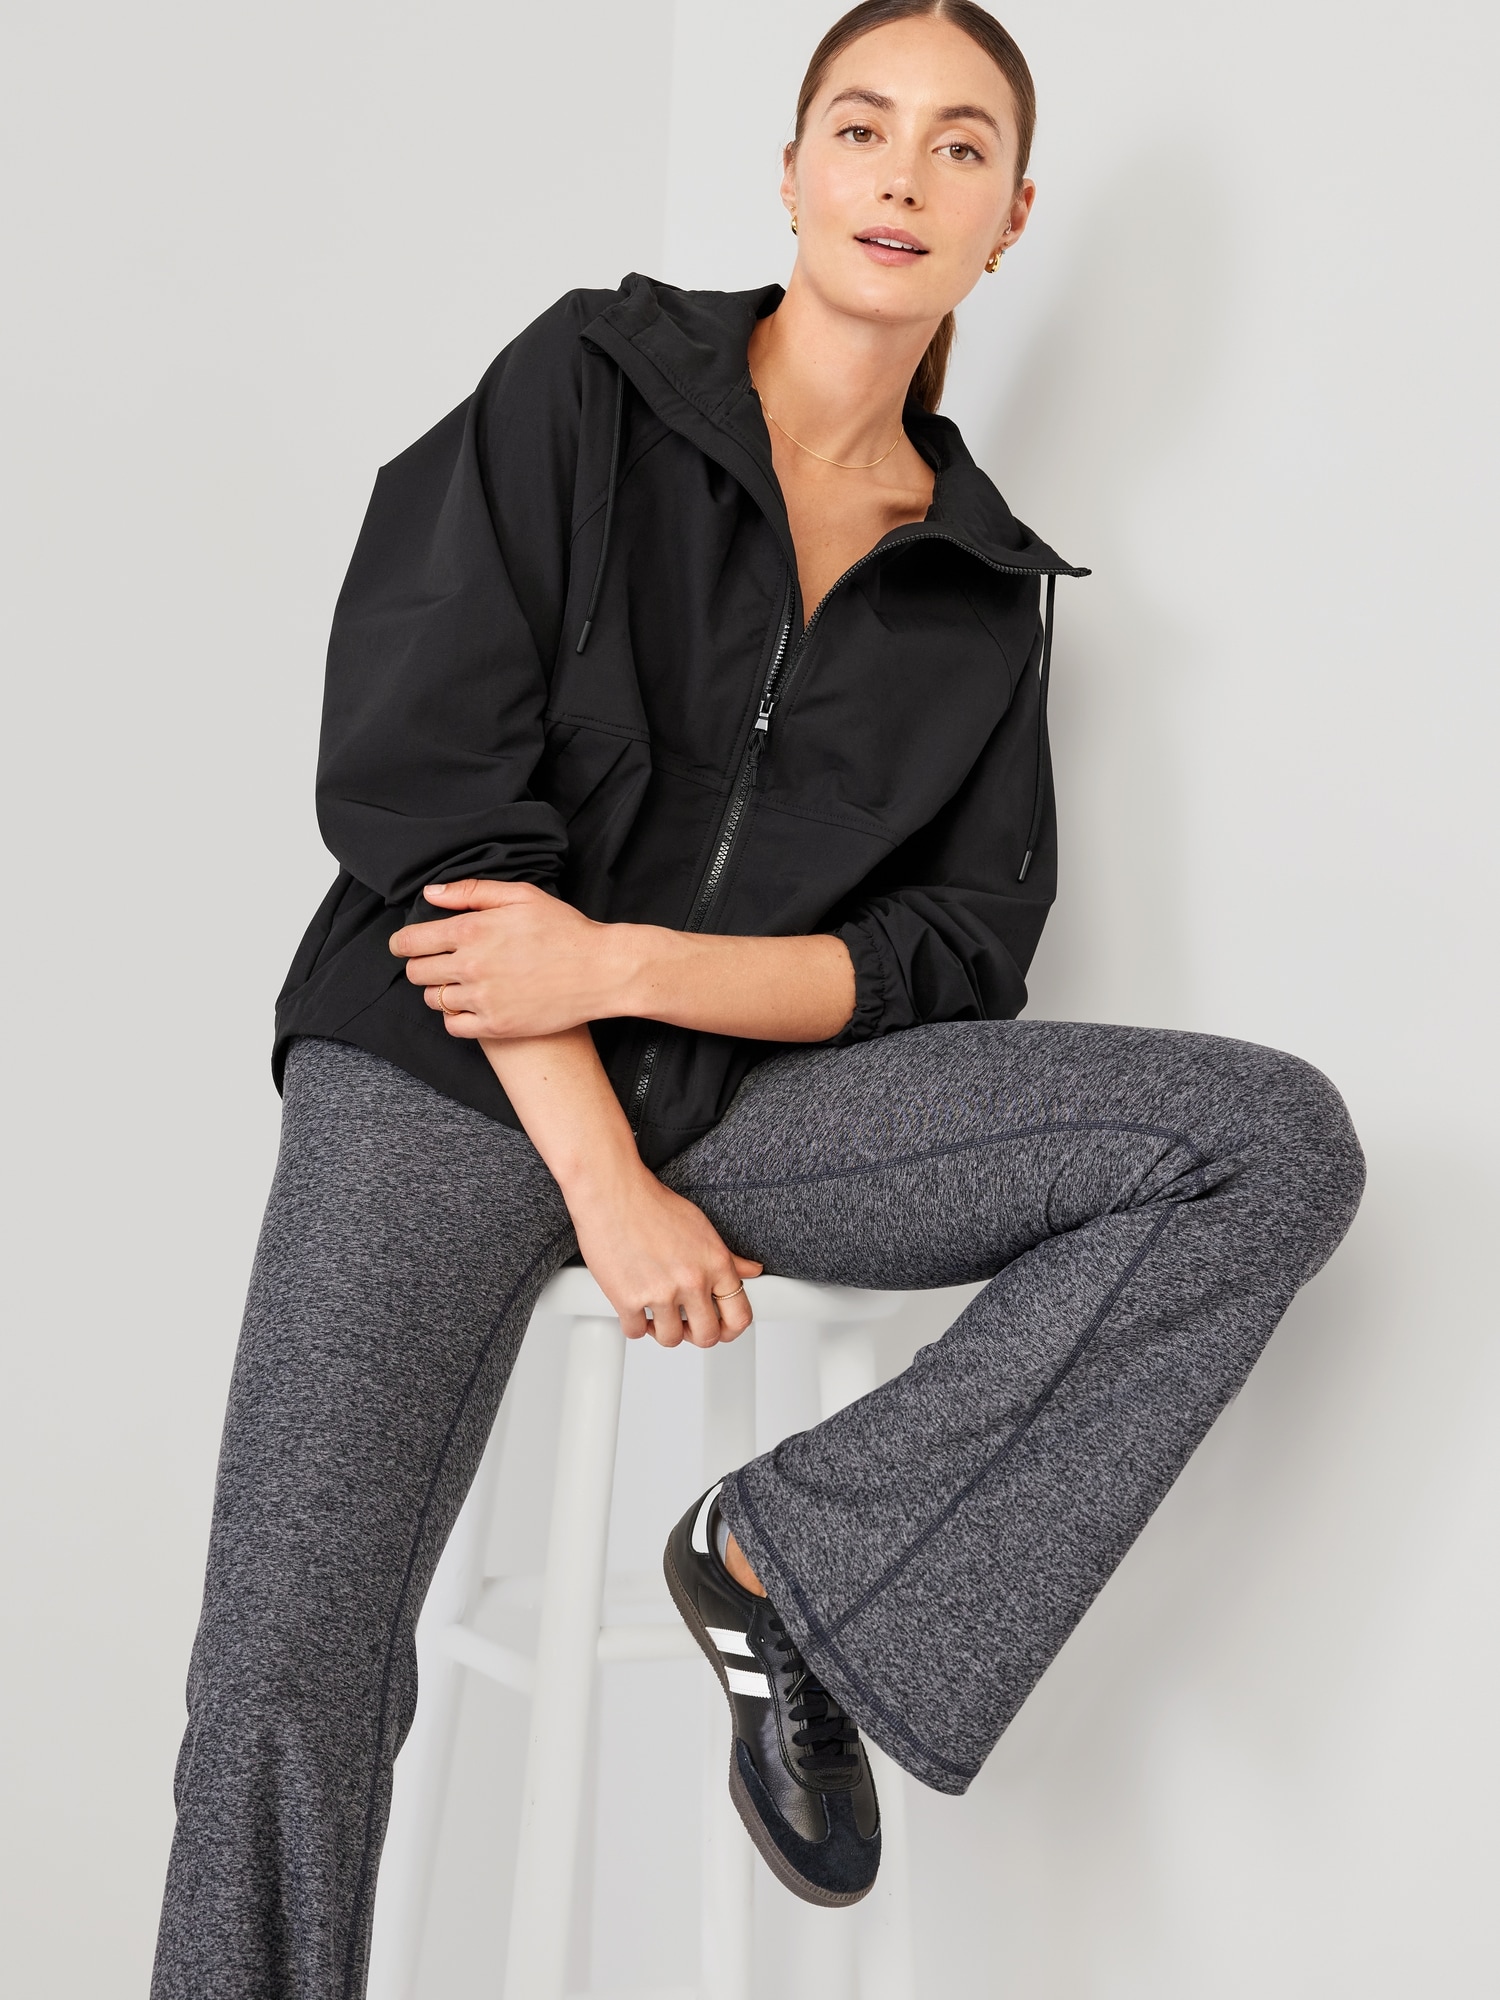 StretchTech Hooded Zip Jacket for Women | Old Navy